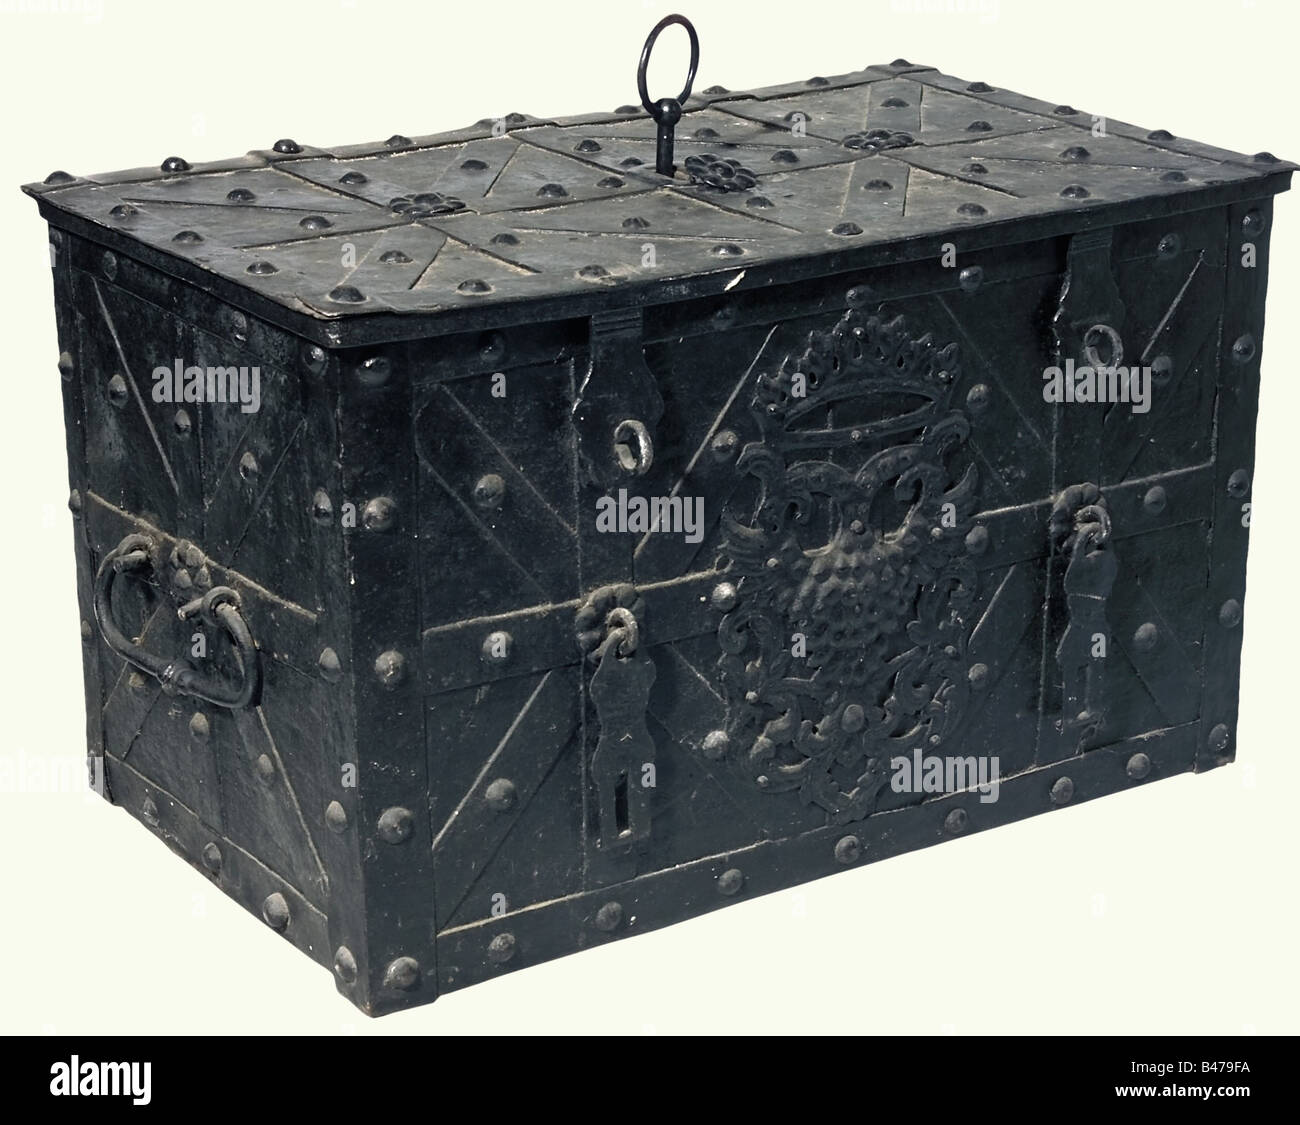 A large German strongbox, 17th/18th century. A rectangular trunk of iron plate furnished with straps and stud rivets. The lid has a central keyhole, a spring loaded lock cover, lock with a hollow shank key and nine wards. The lock mechanism has a simple cover plate. The front bears a decorative double headed eagle, and two hasps for locks. There are two movable carrying handles on the sides. The interior has been recently lined with wood. Dimensions 55 x 91 x 55 cm. historic, historical,, 18th century, 17th century, handicrafts, handcraft, craft, object, object, Stock Photo